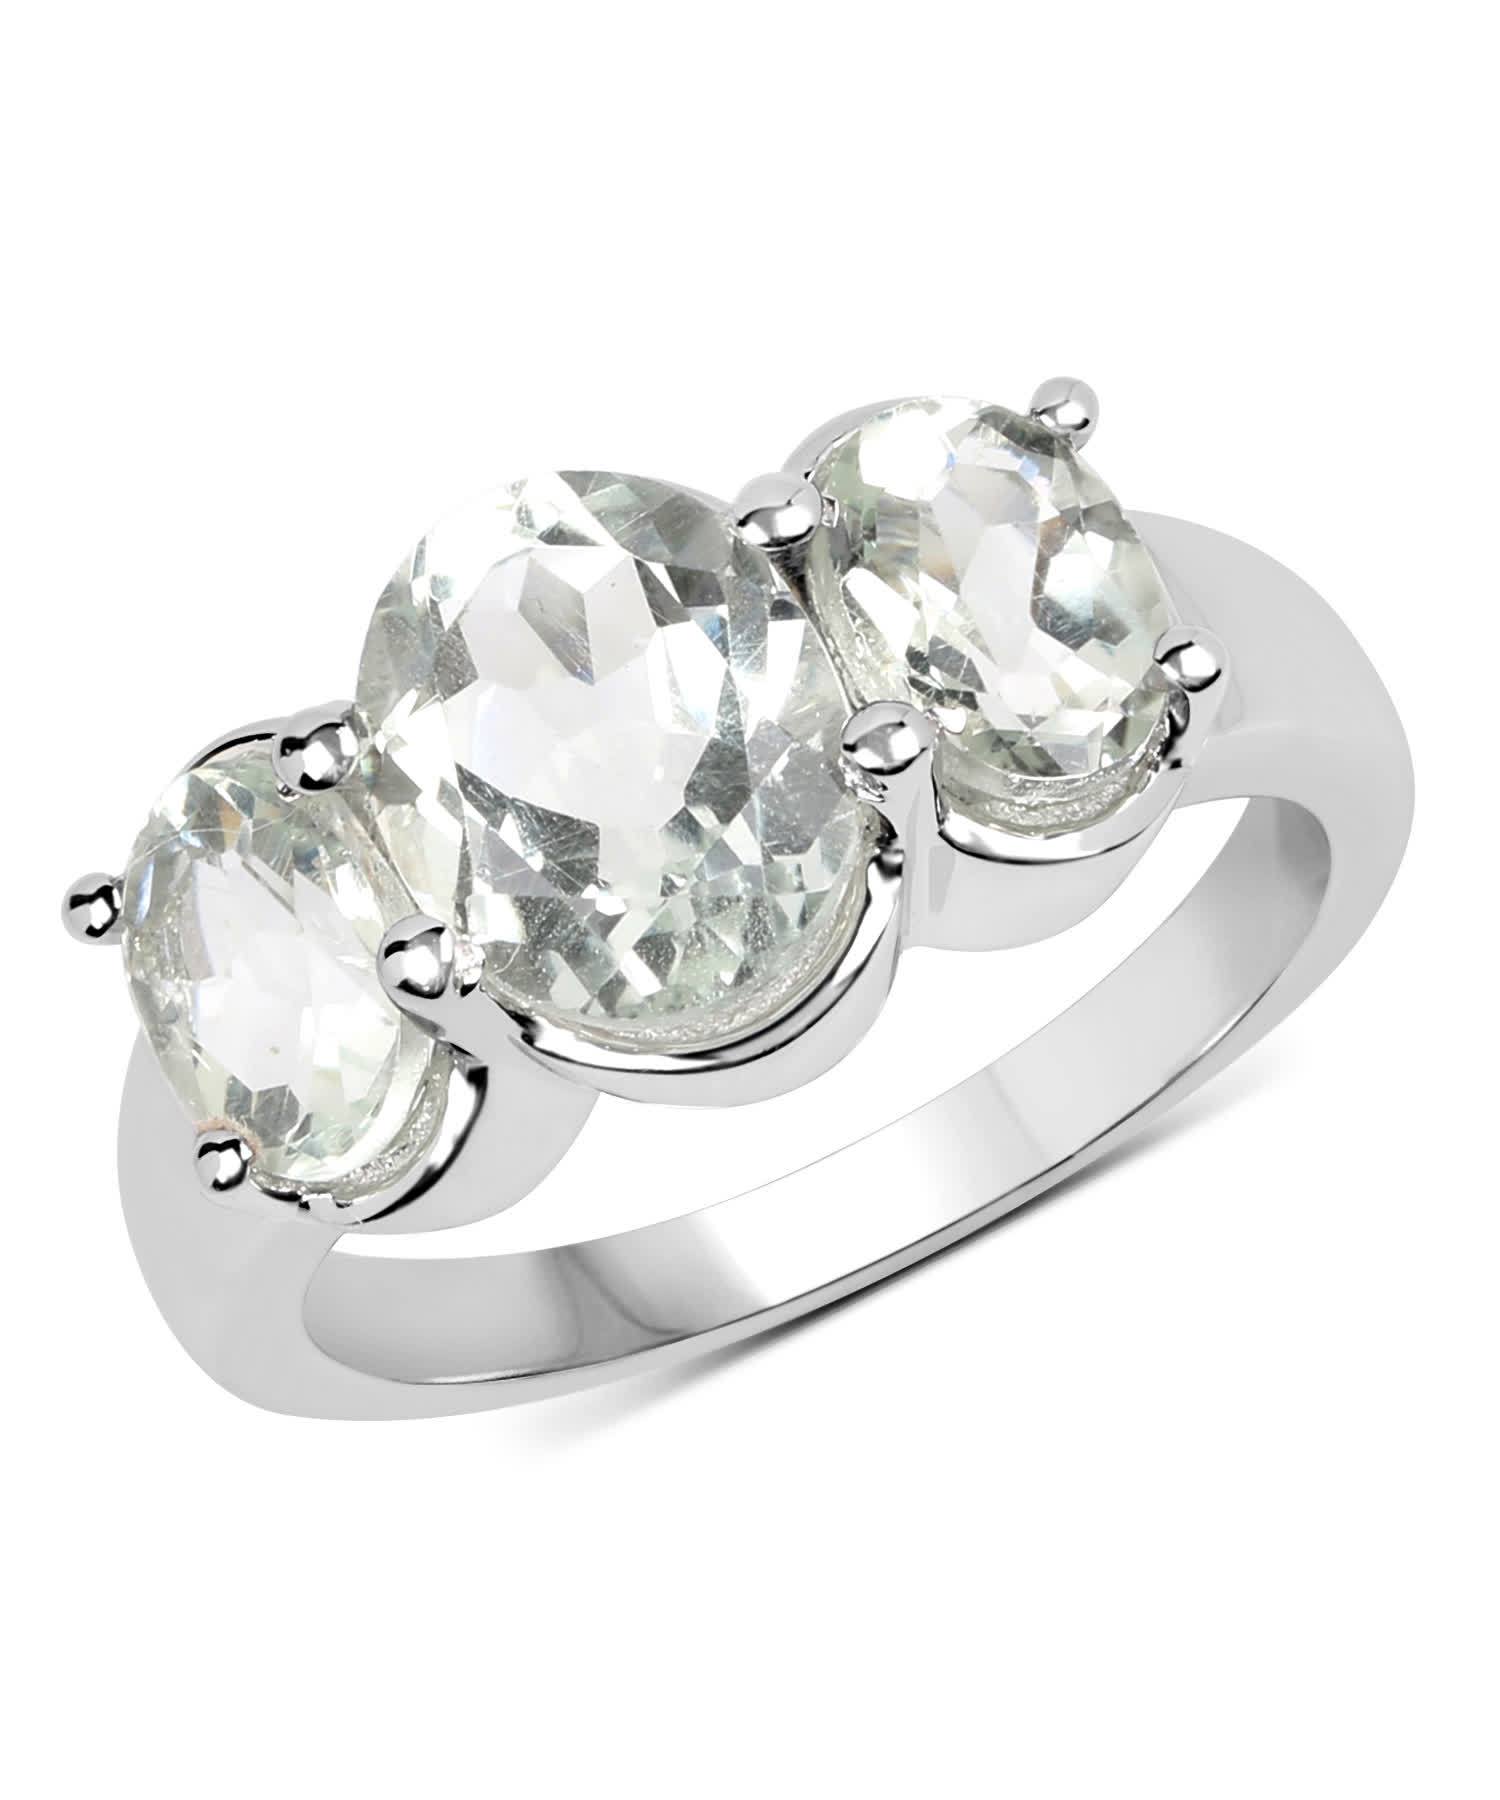 3.30ctw Natural Green Amethyst Rhodium Plated 925 Sterling Silver Three-Stone Ring View 1